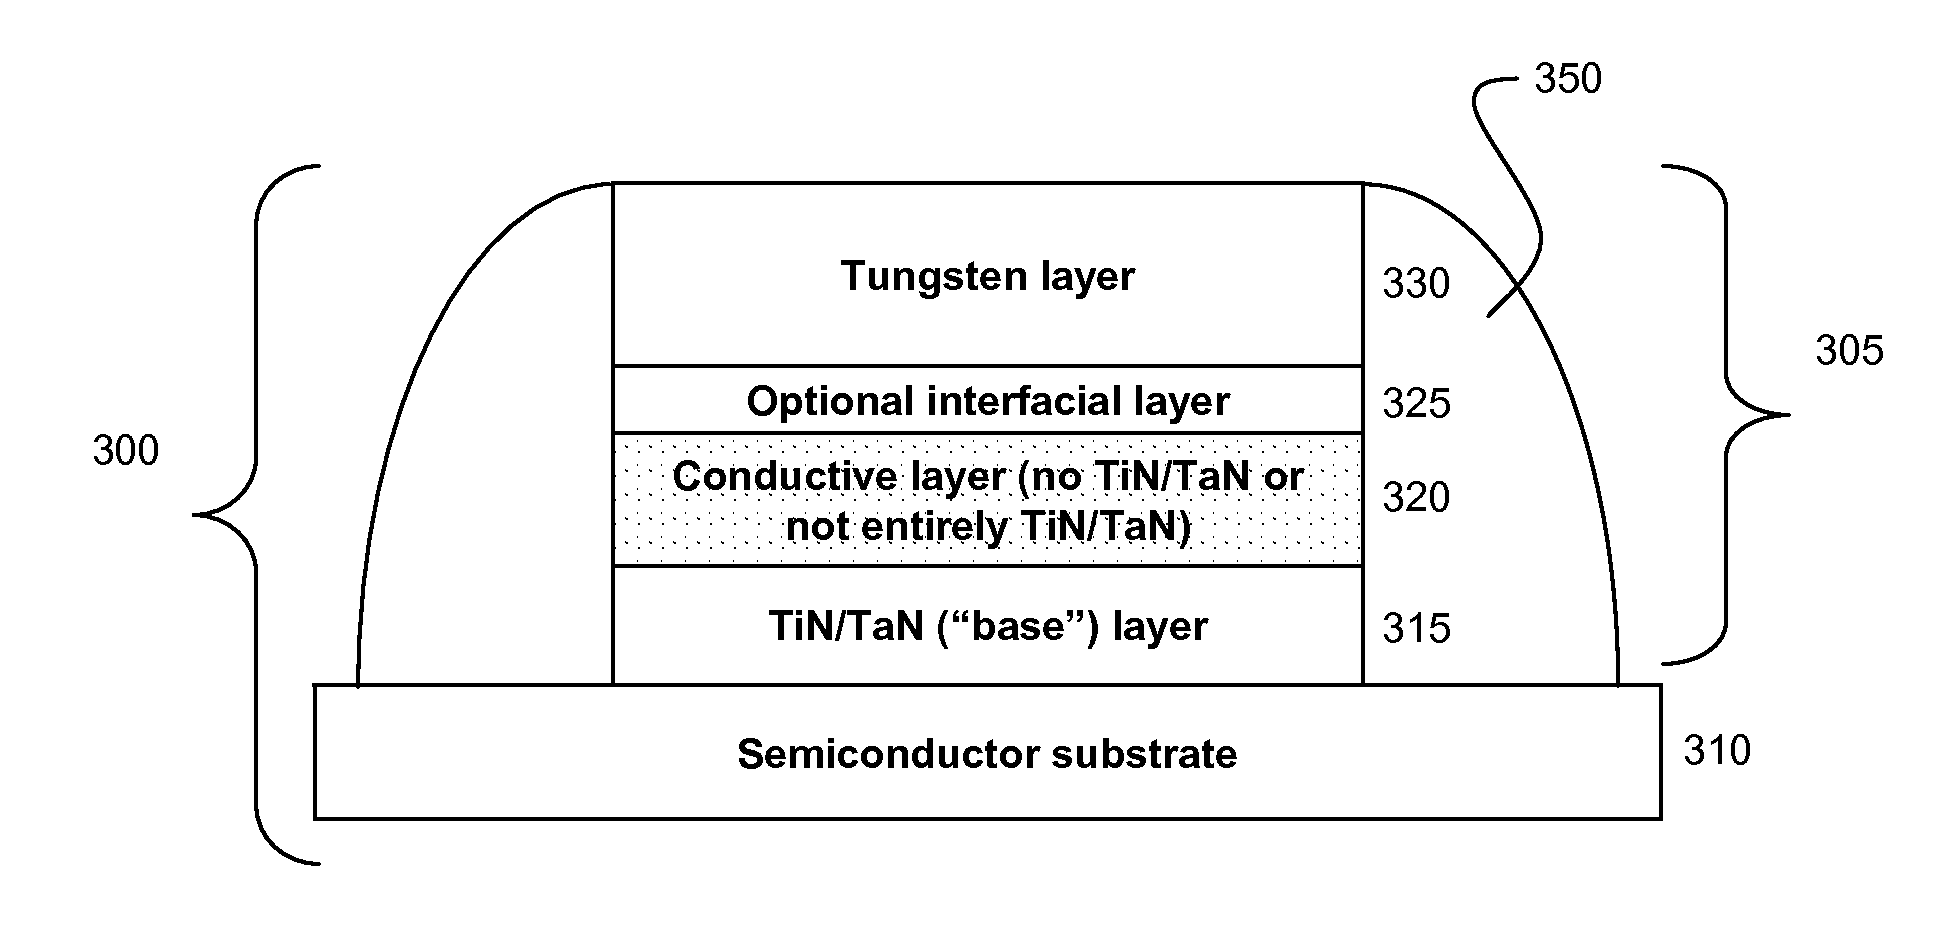 Large-grain, low-resistivity tungsten on a conductive compound